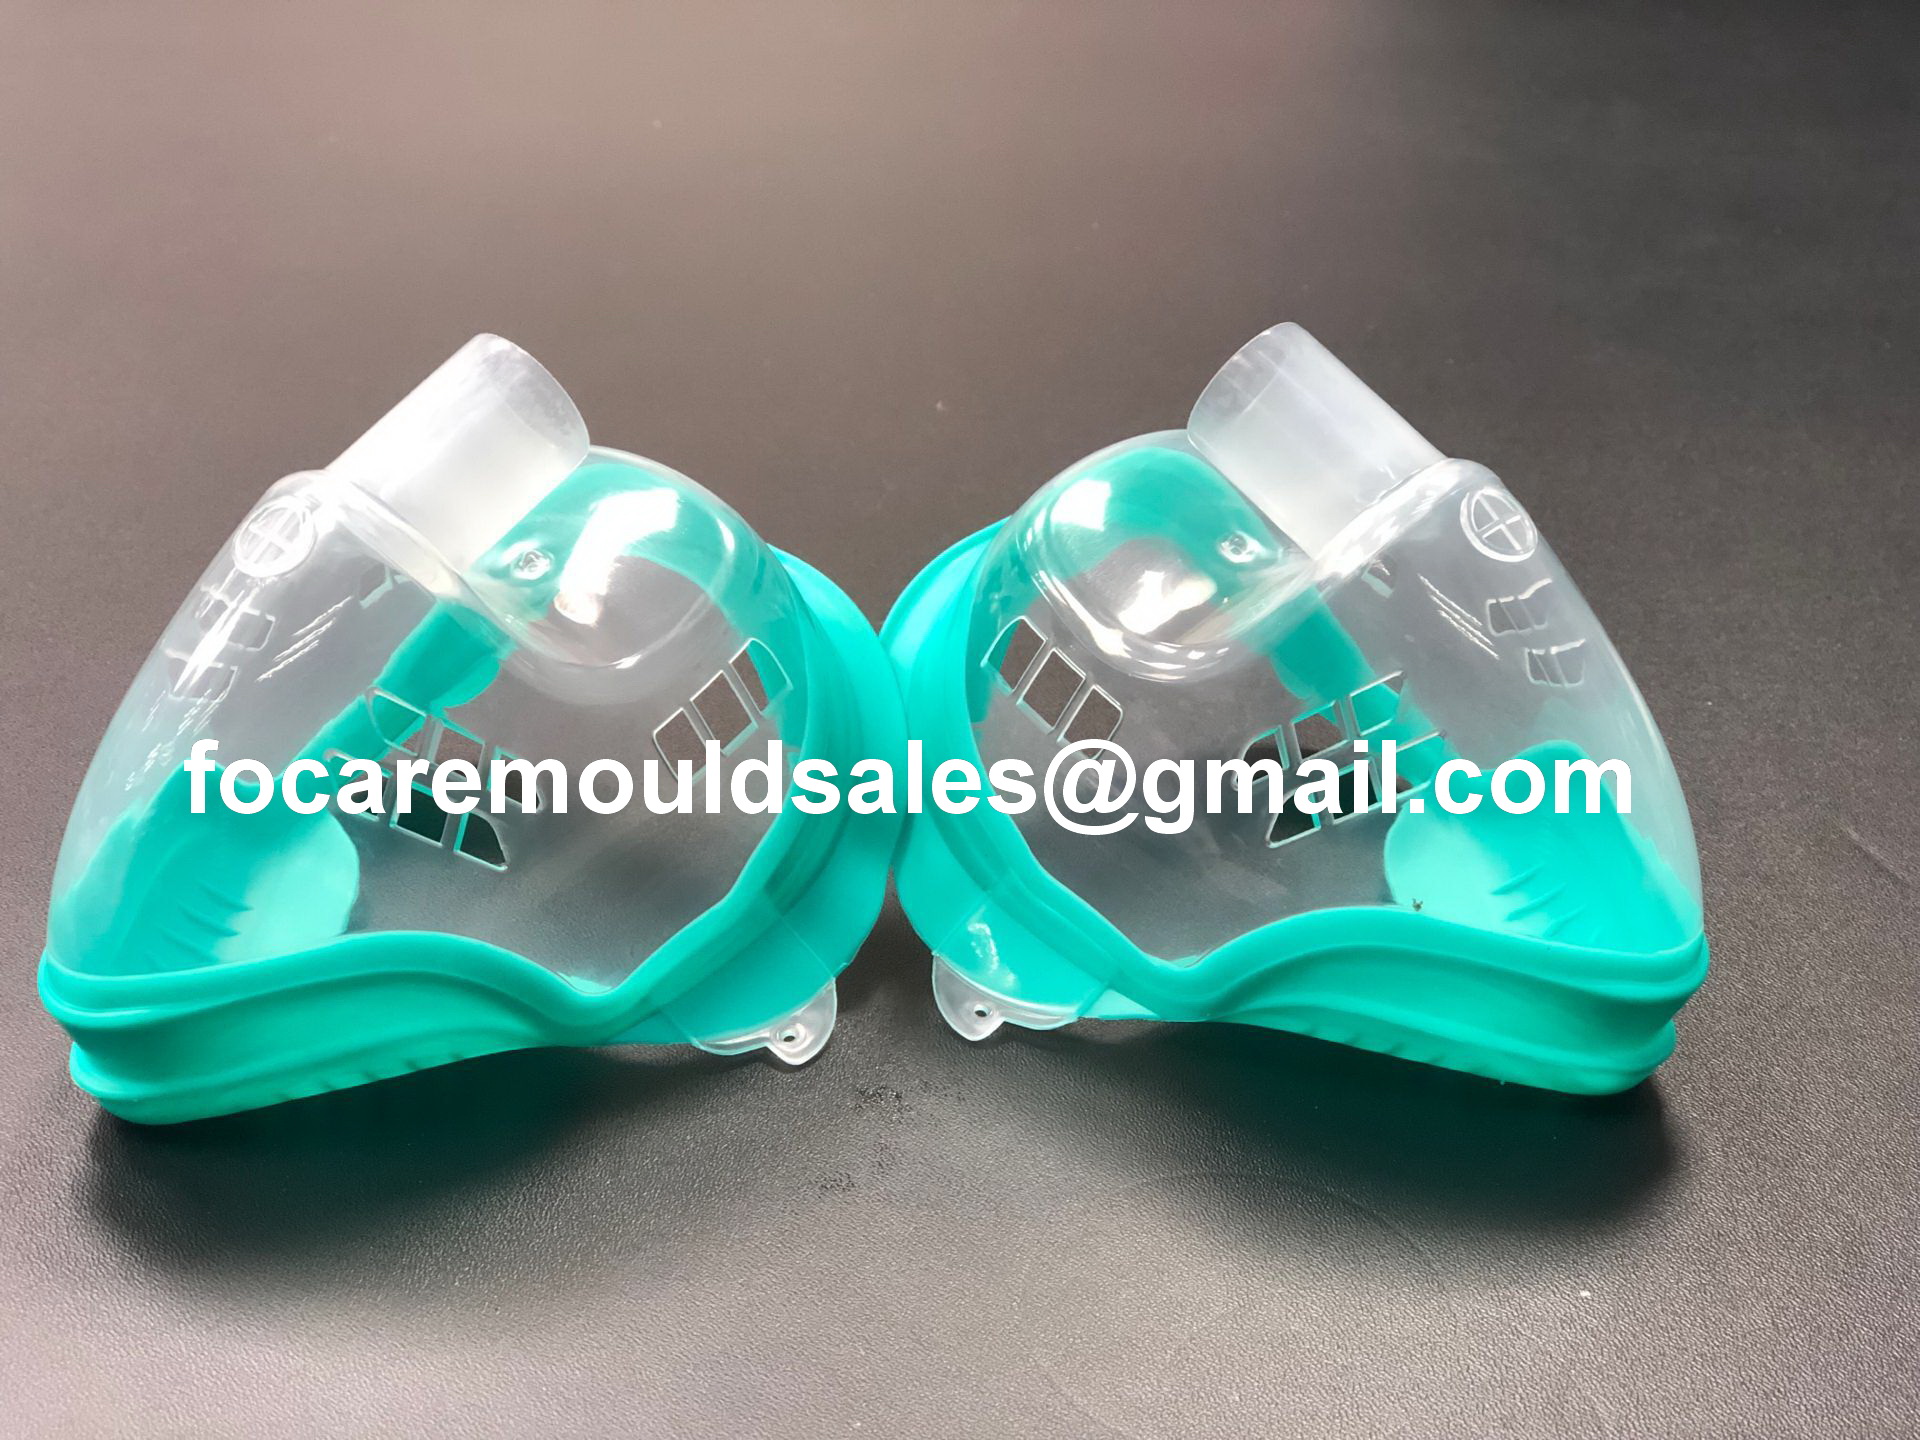 Two-color oxygen mask mold